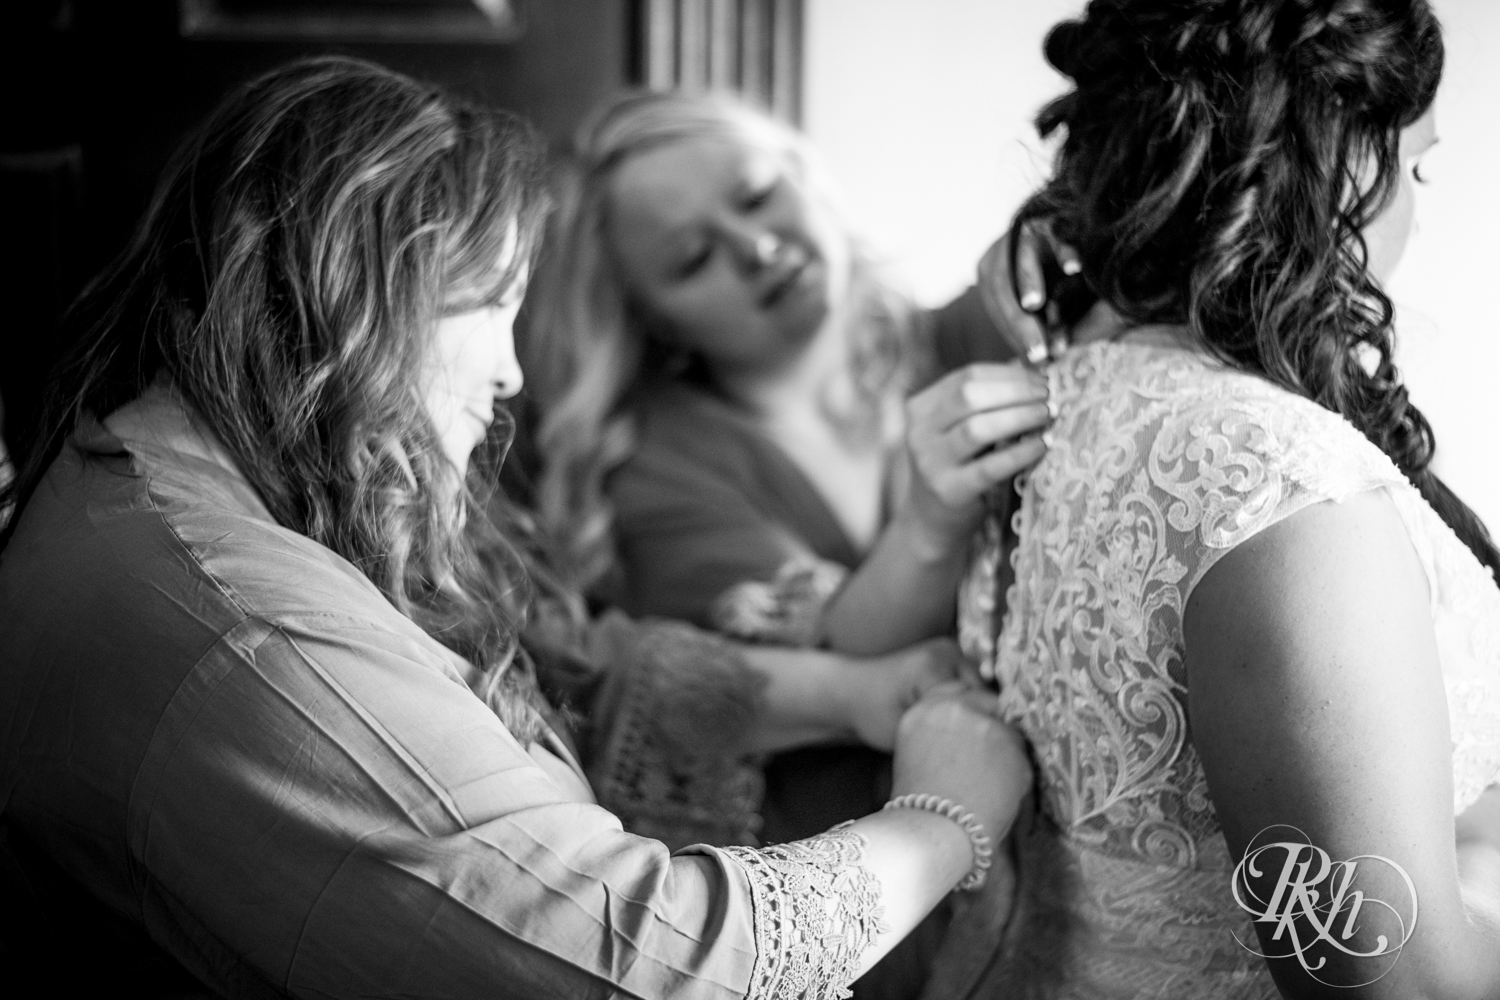 Bride getting buttoned into wedding dress at Kellerman's Event Center in White Bear Lake, Minnesota.